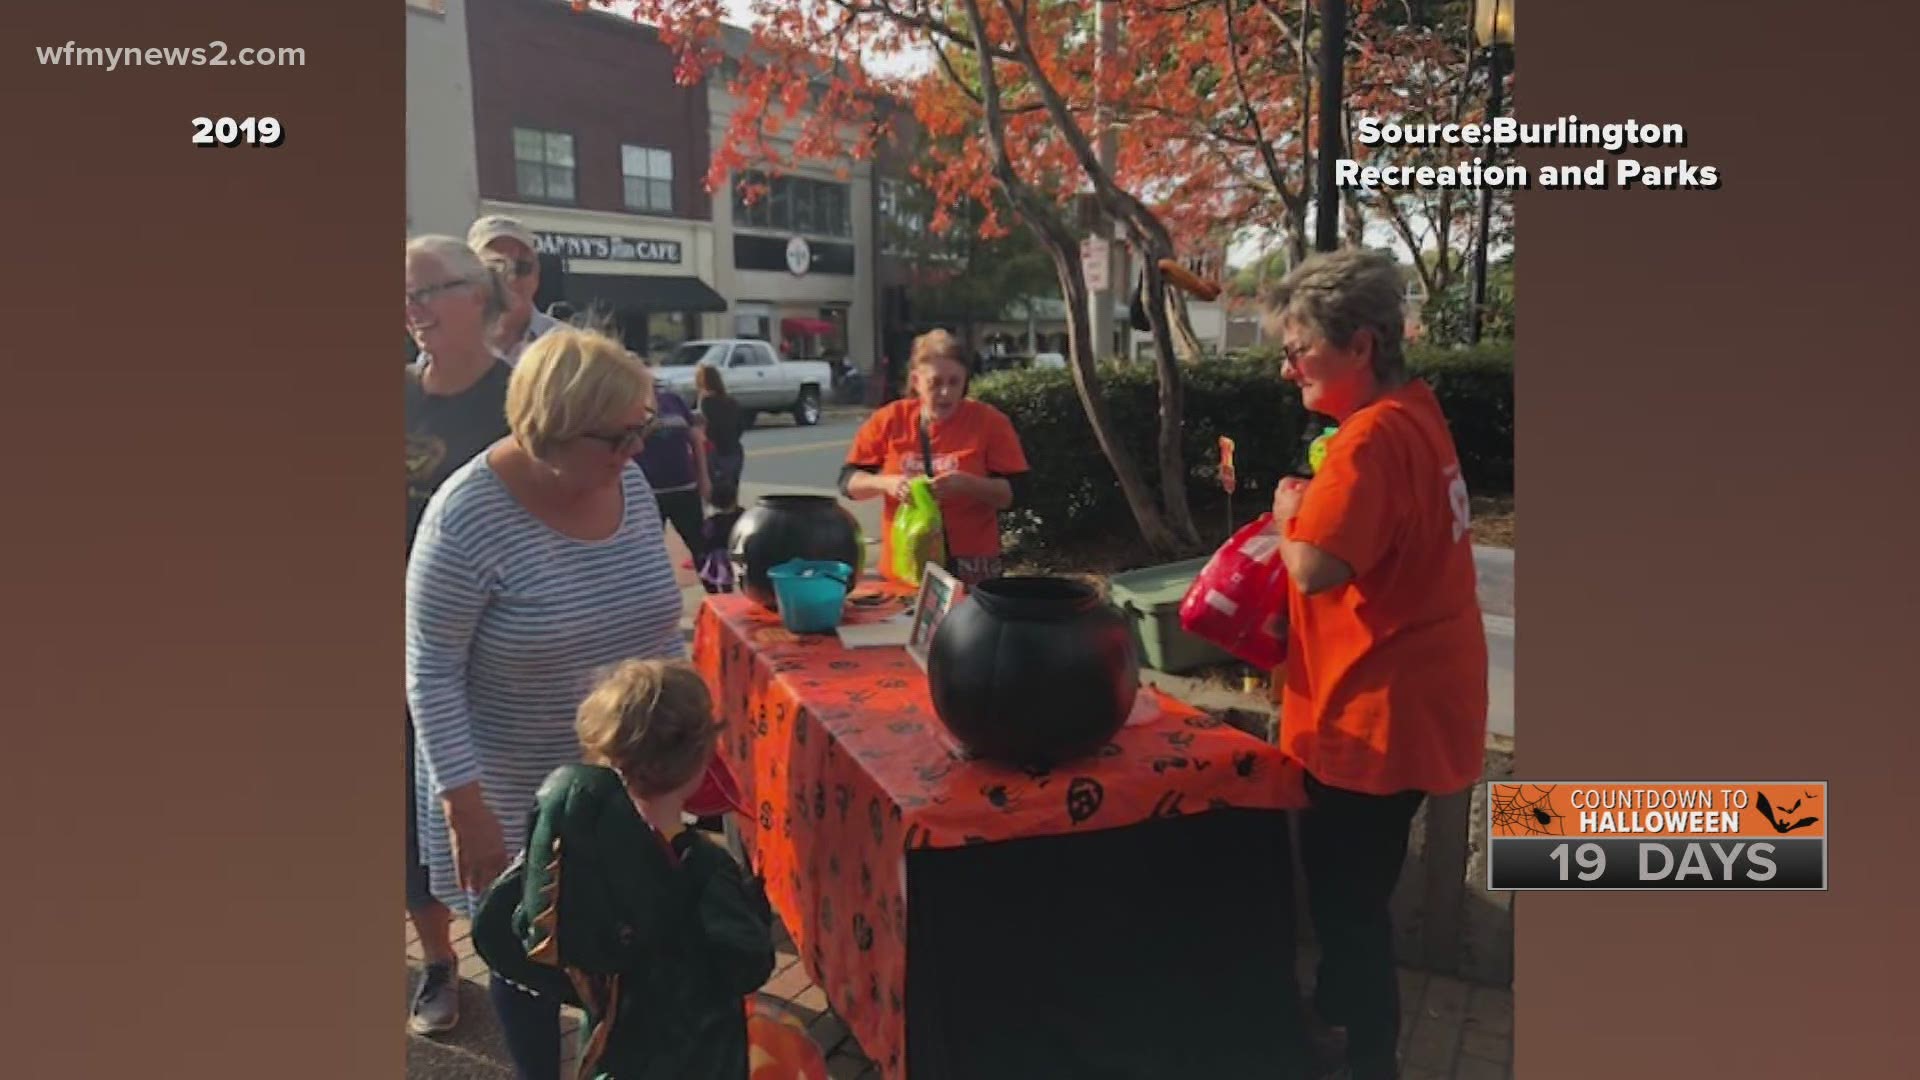 The city of Burlington has two Halloween events that follow coronavirus safety tips from the CDC. Families can participate in a cruise-thru or a scavenger hunt.